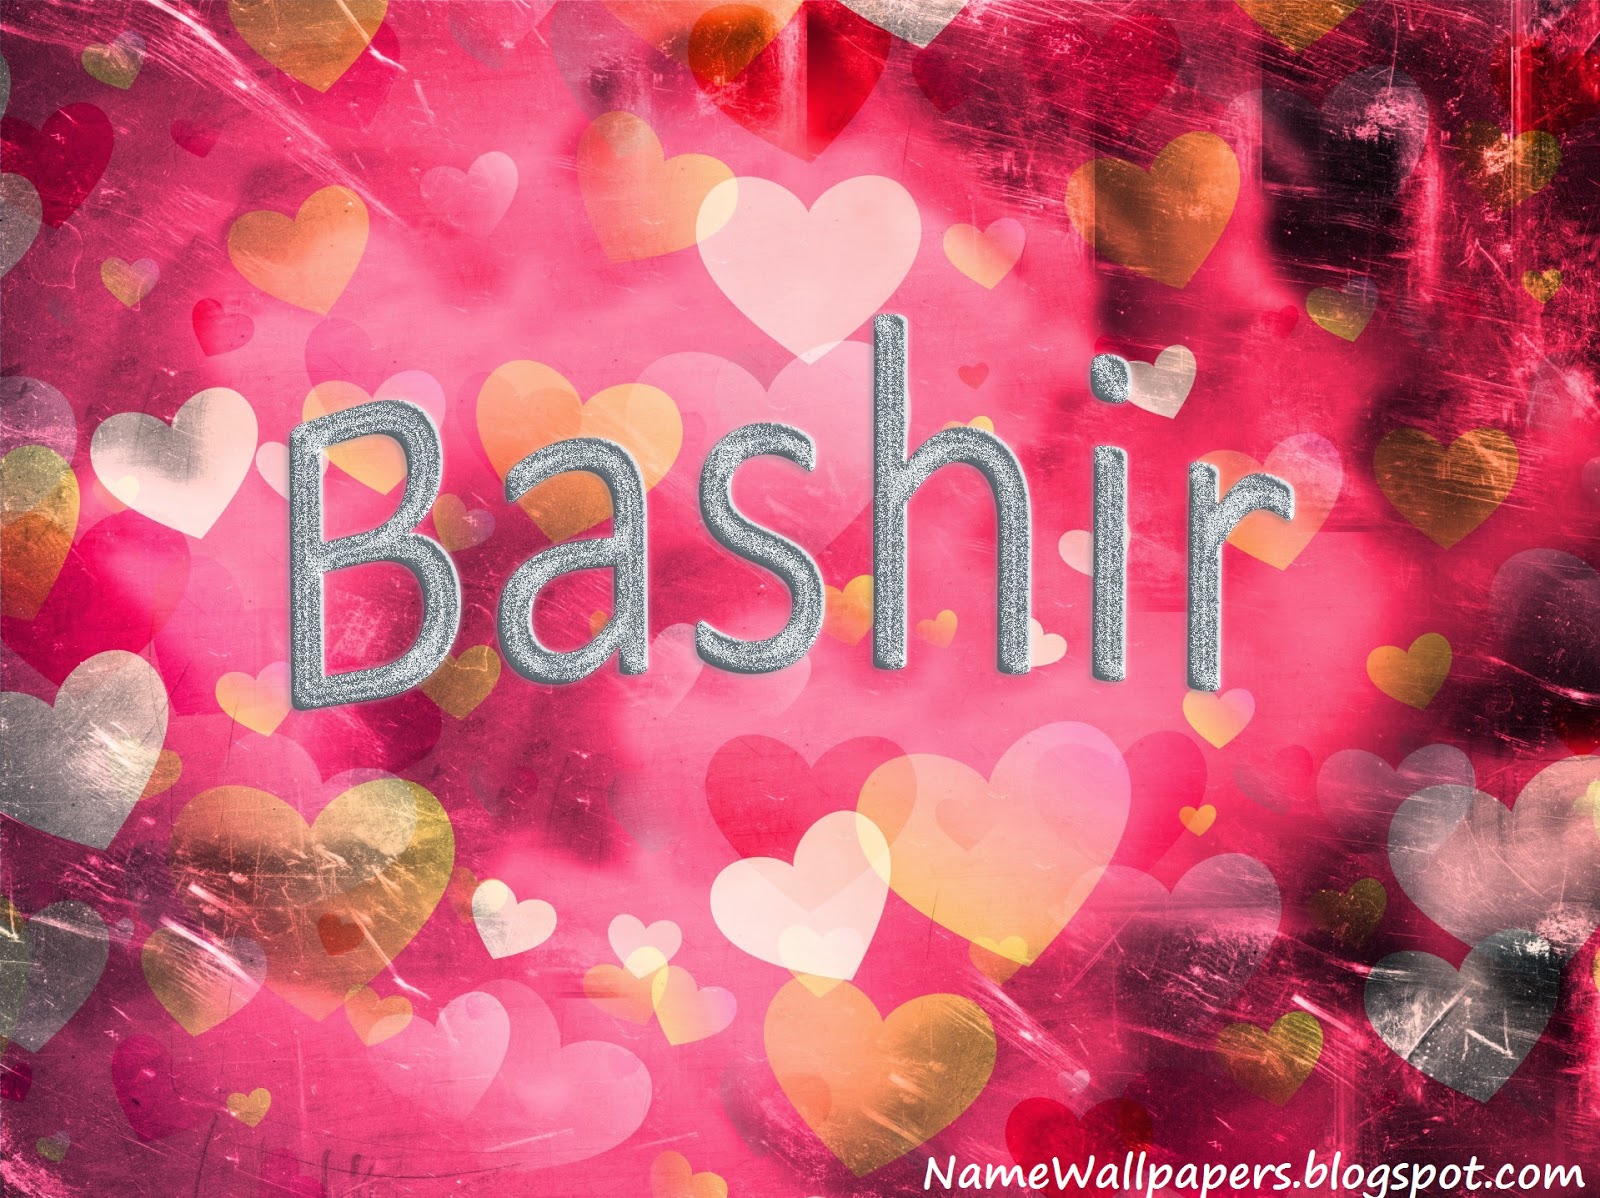 Bashir Name Wallpapers Bashir ~ Name Wallpaper Urdu Name Meaning Name ...